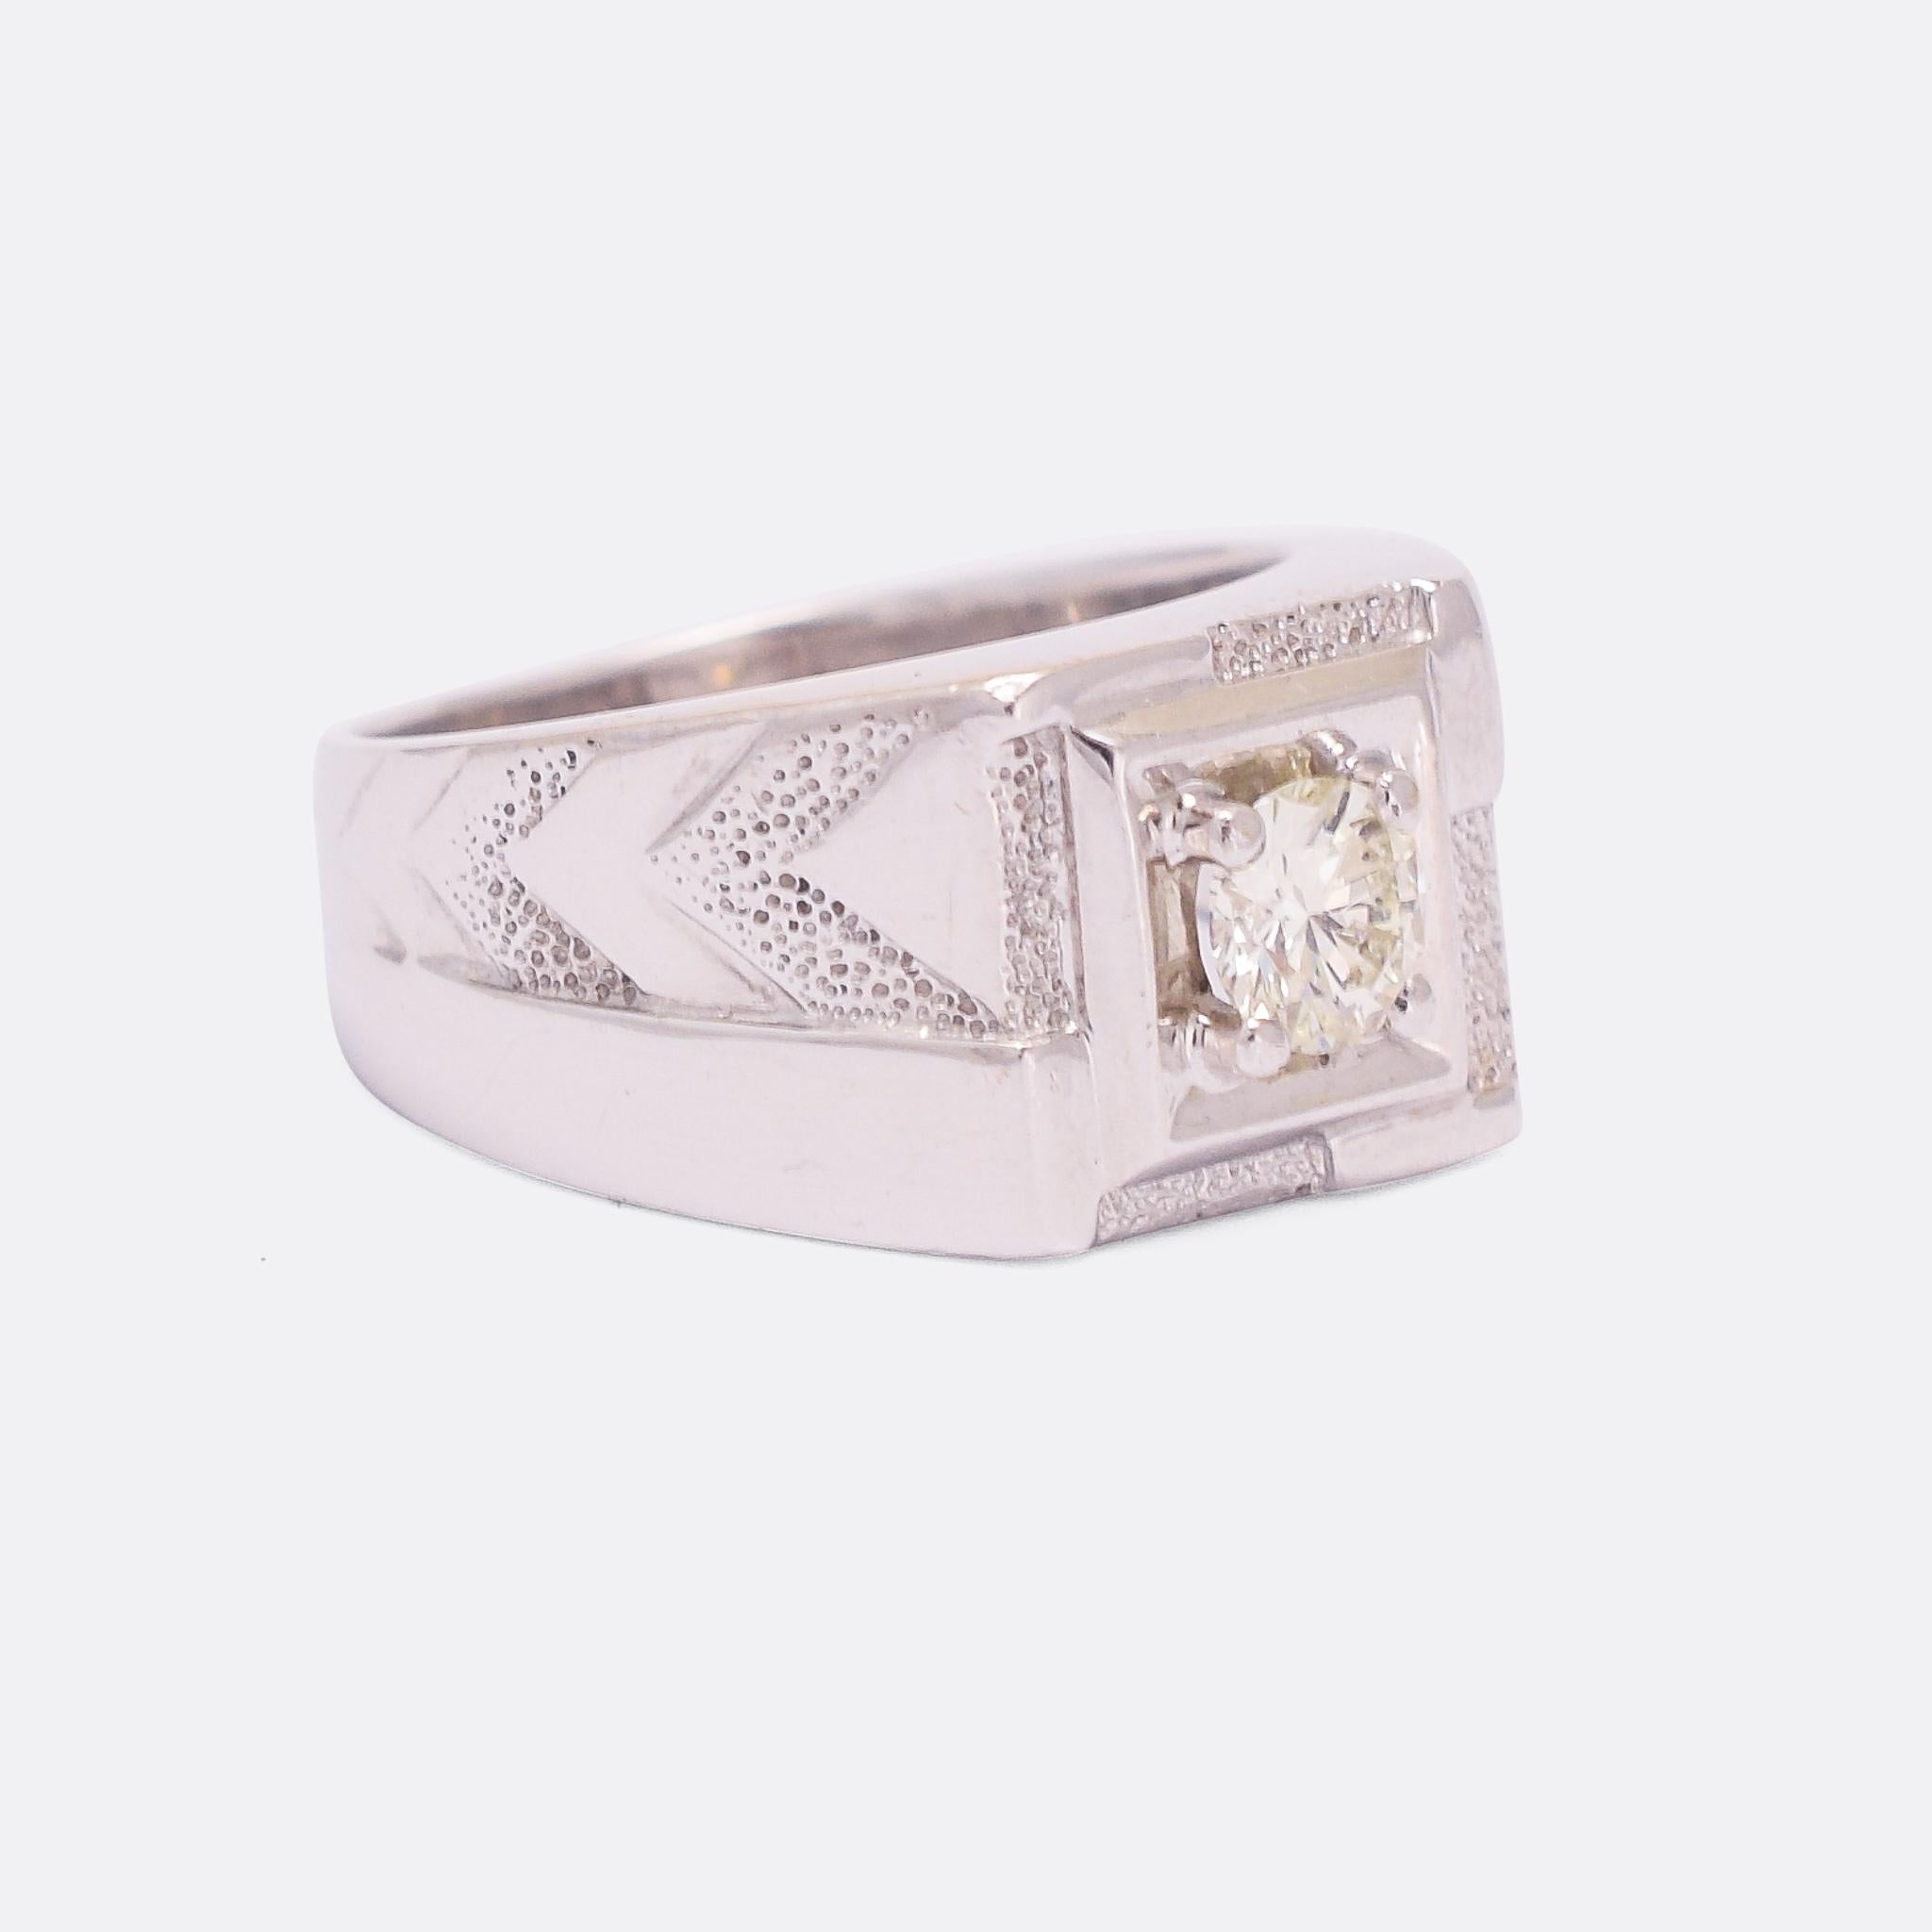 A cool Art Deco era pinky ring with textured chevron details to the shoulders and set with a single brilliant cut diamond. It's modelled in 18k white gold, platinum set, and dates from the 1930s.

STONES 
0.35ct Brilliant cut diamond - approx. VS2